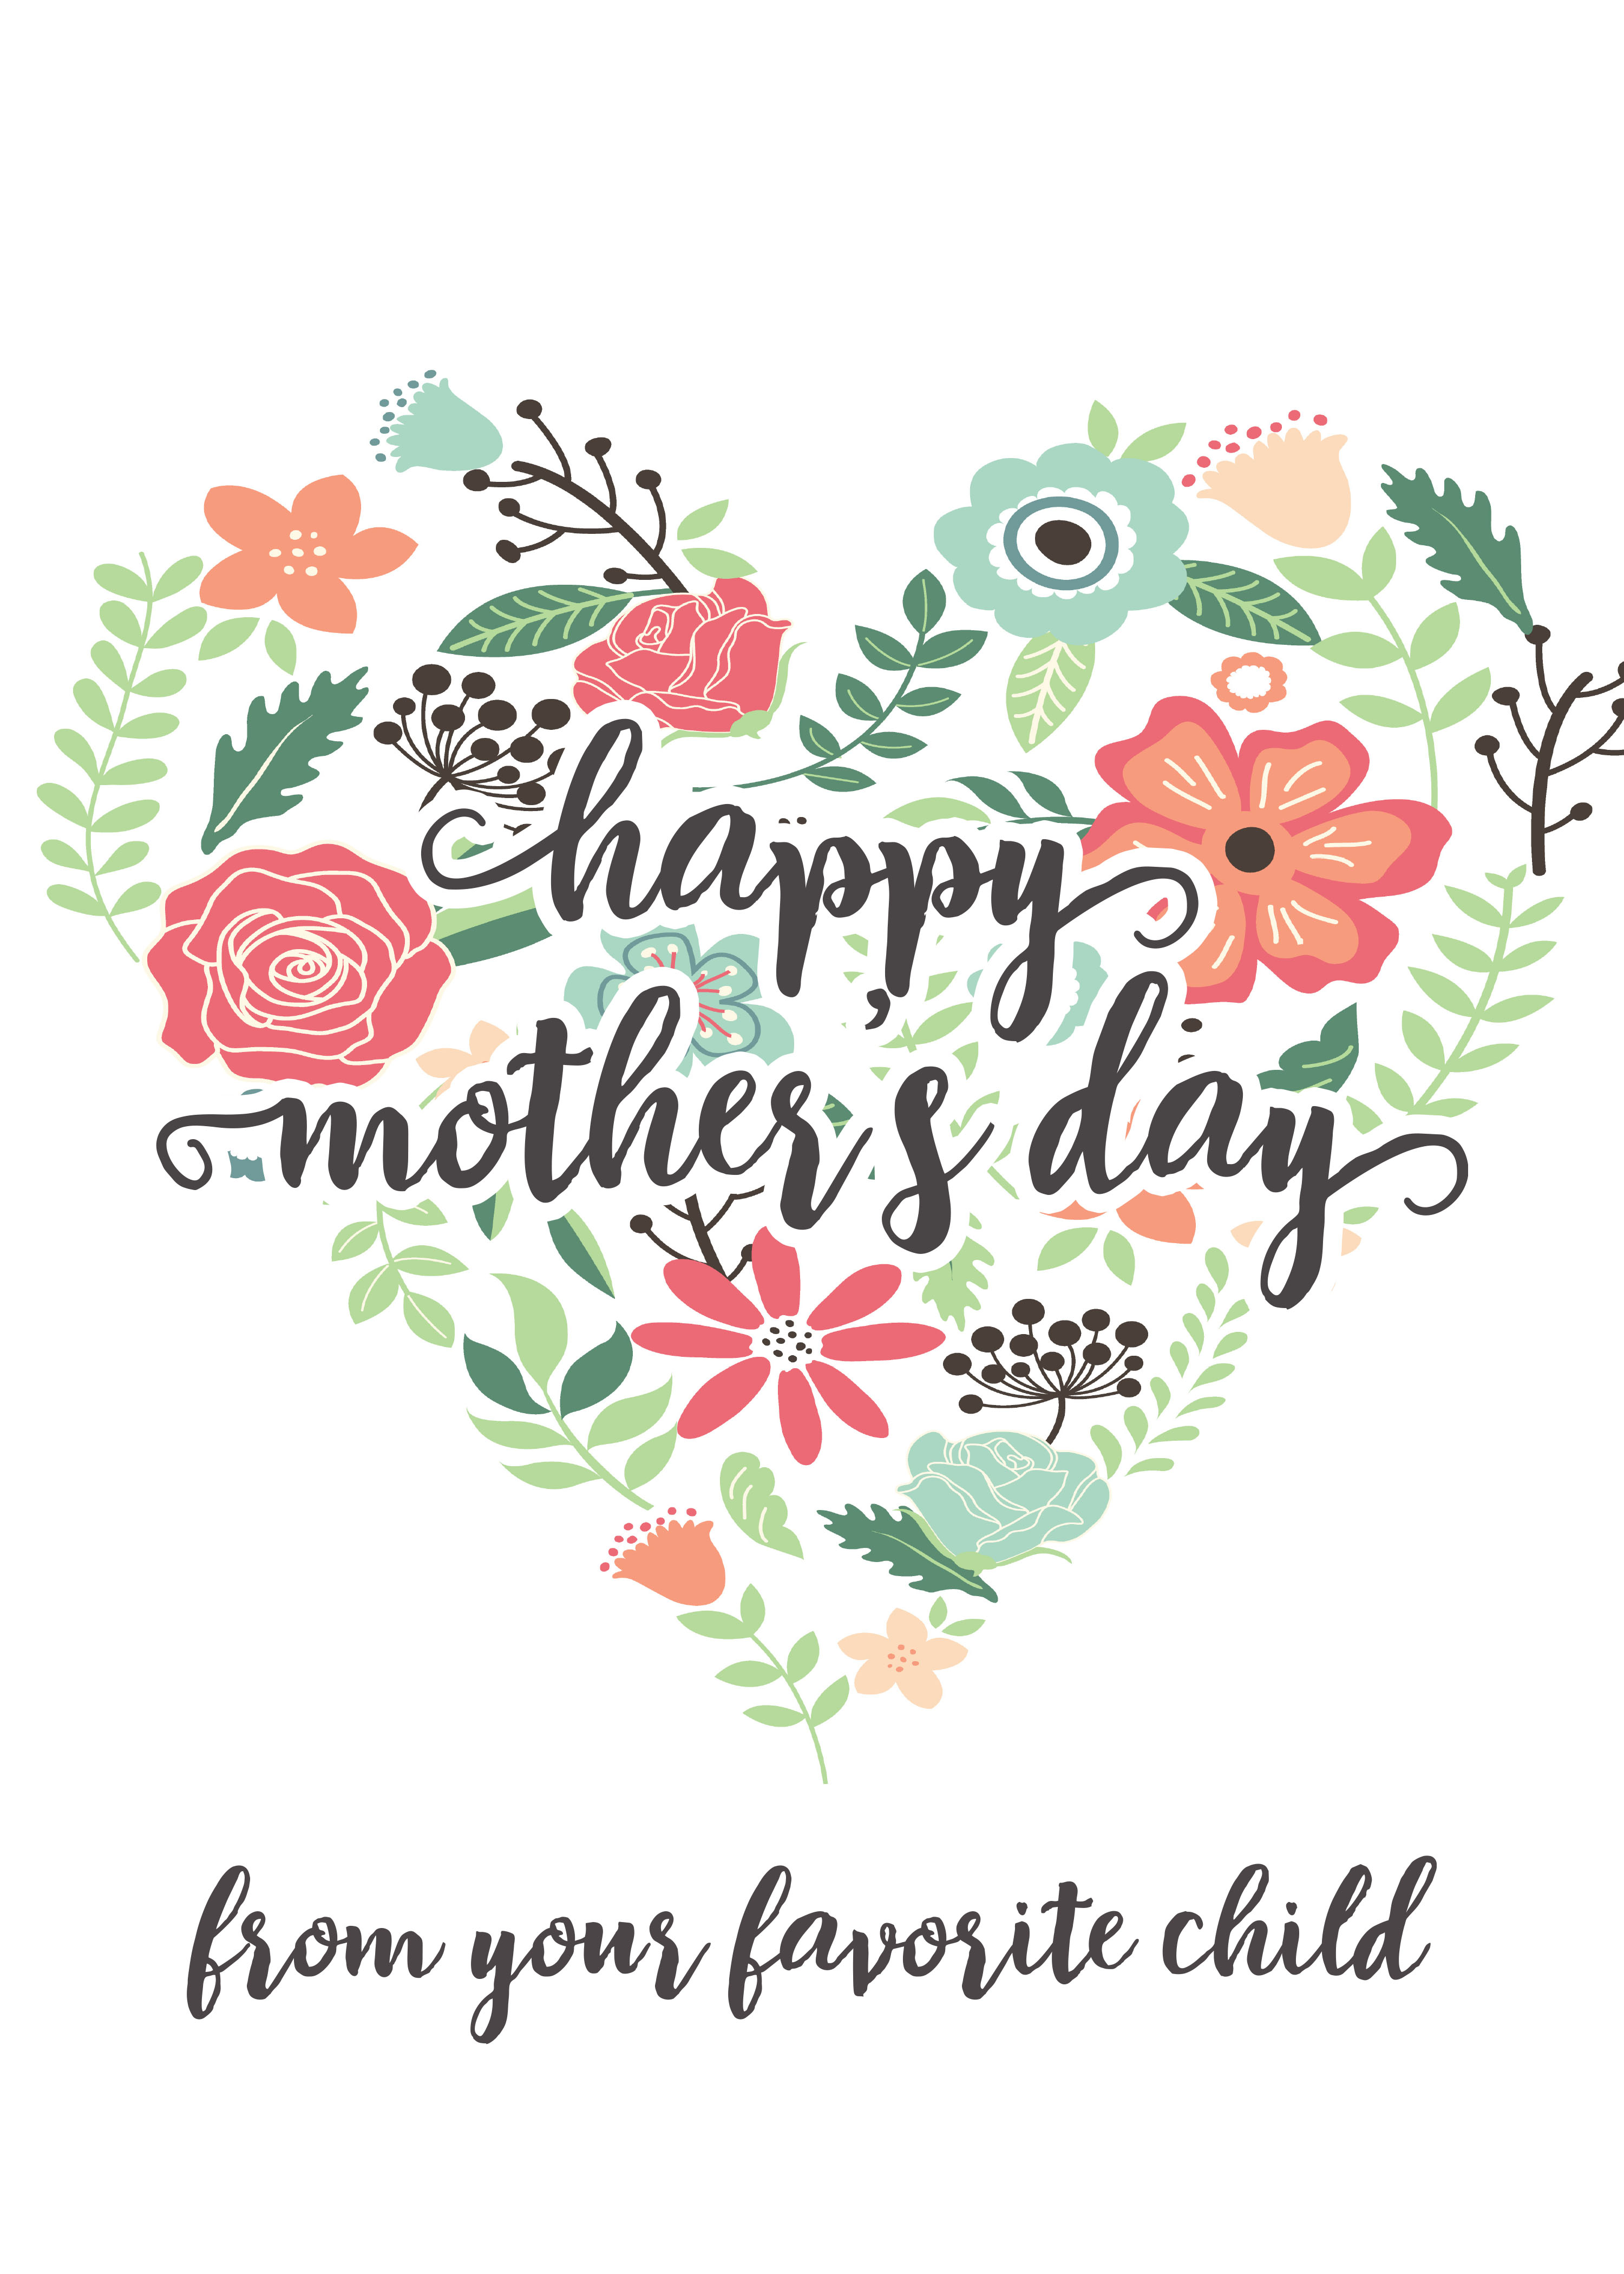 Mothers Day Messages Free Printable Mothers Day Cards @forkidsandmoms Happy Mothers Day